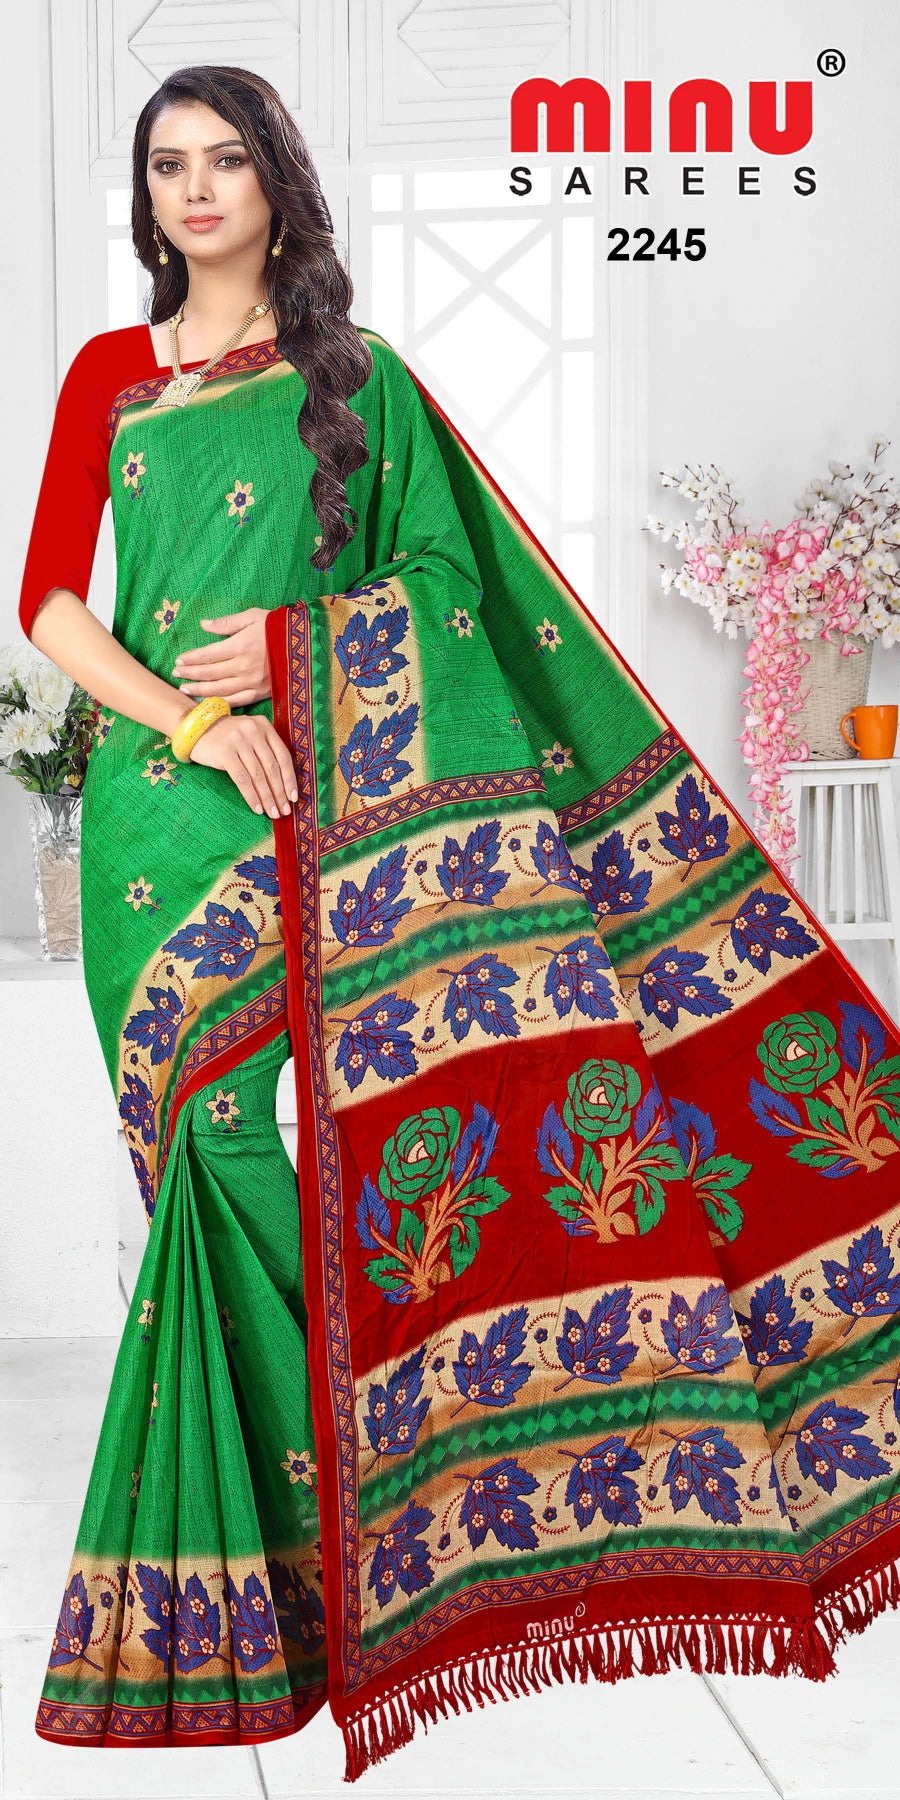 Green printed classy and bold color saree wearing woman image